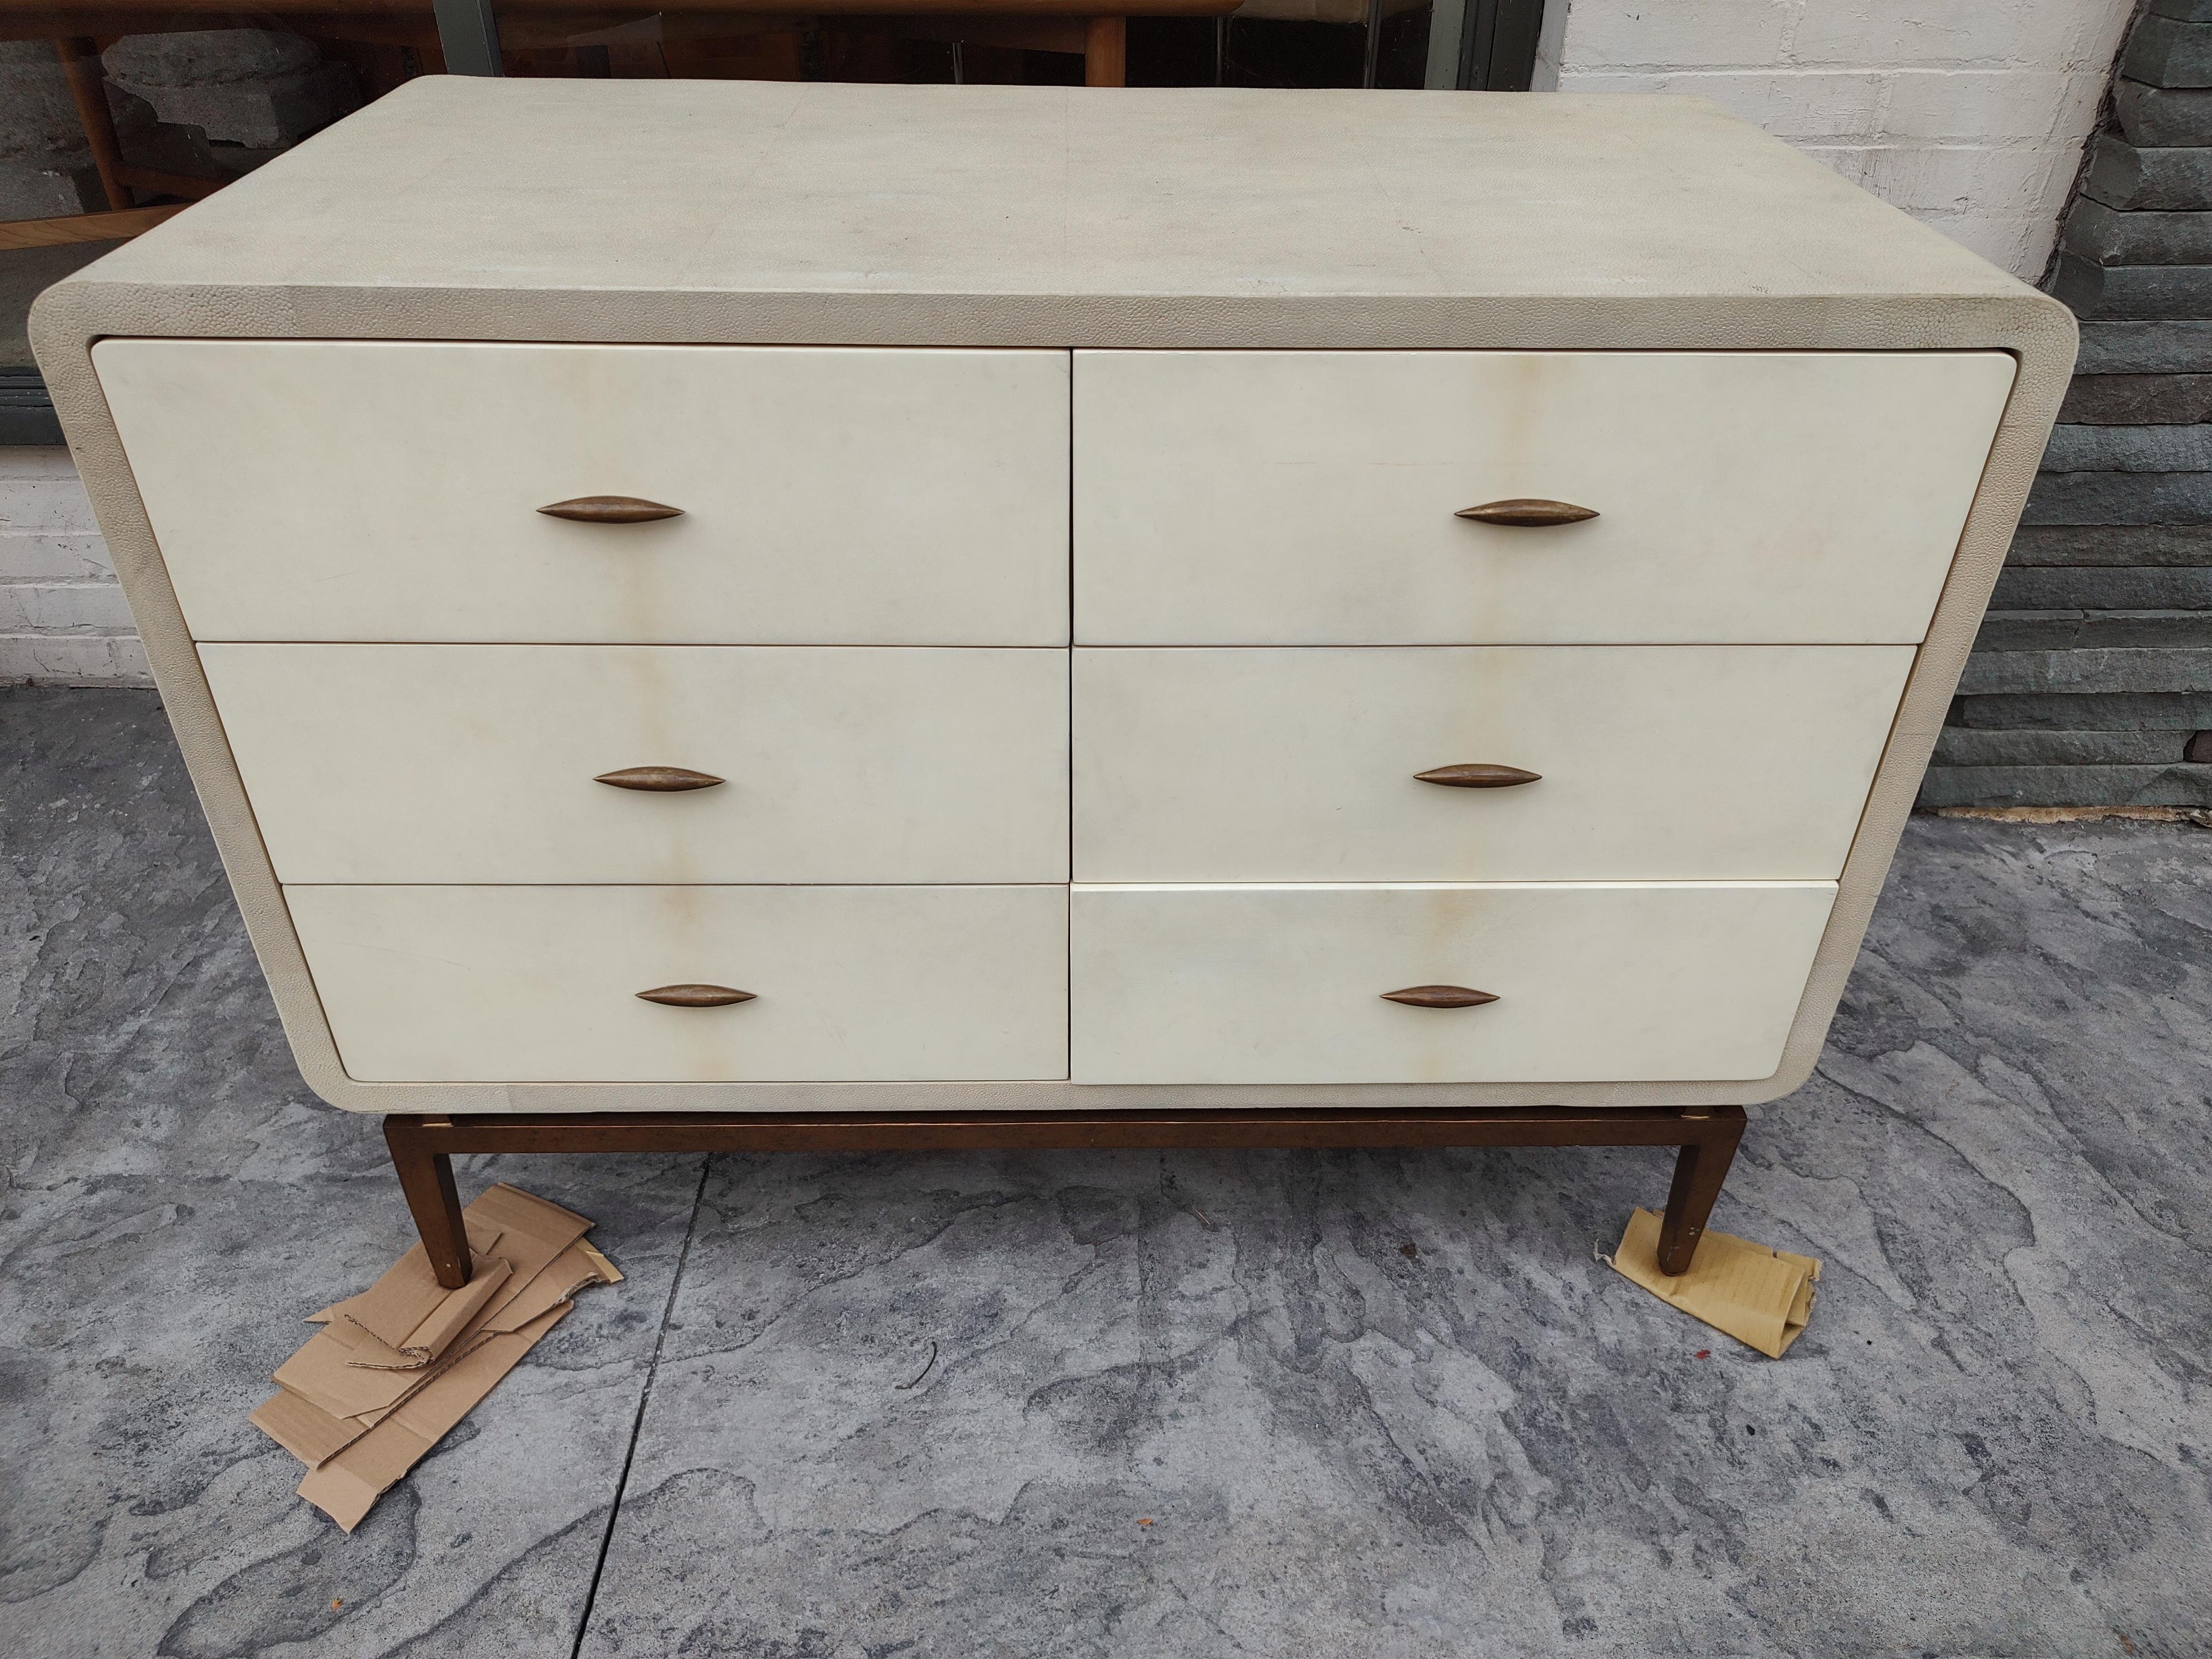 Fabulous chest of drawers which the case piece is covered in Shagreen. Drawers are enameled with a Gilt bronze pulls and base. A true quality piece. In excellent vintage condition with minimal wear. Drawers all glide nice and smooth. Heavy solid